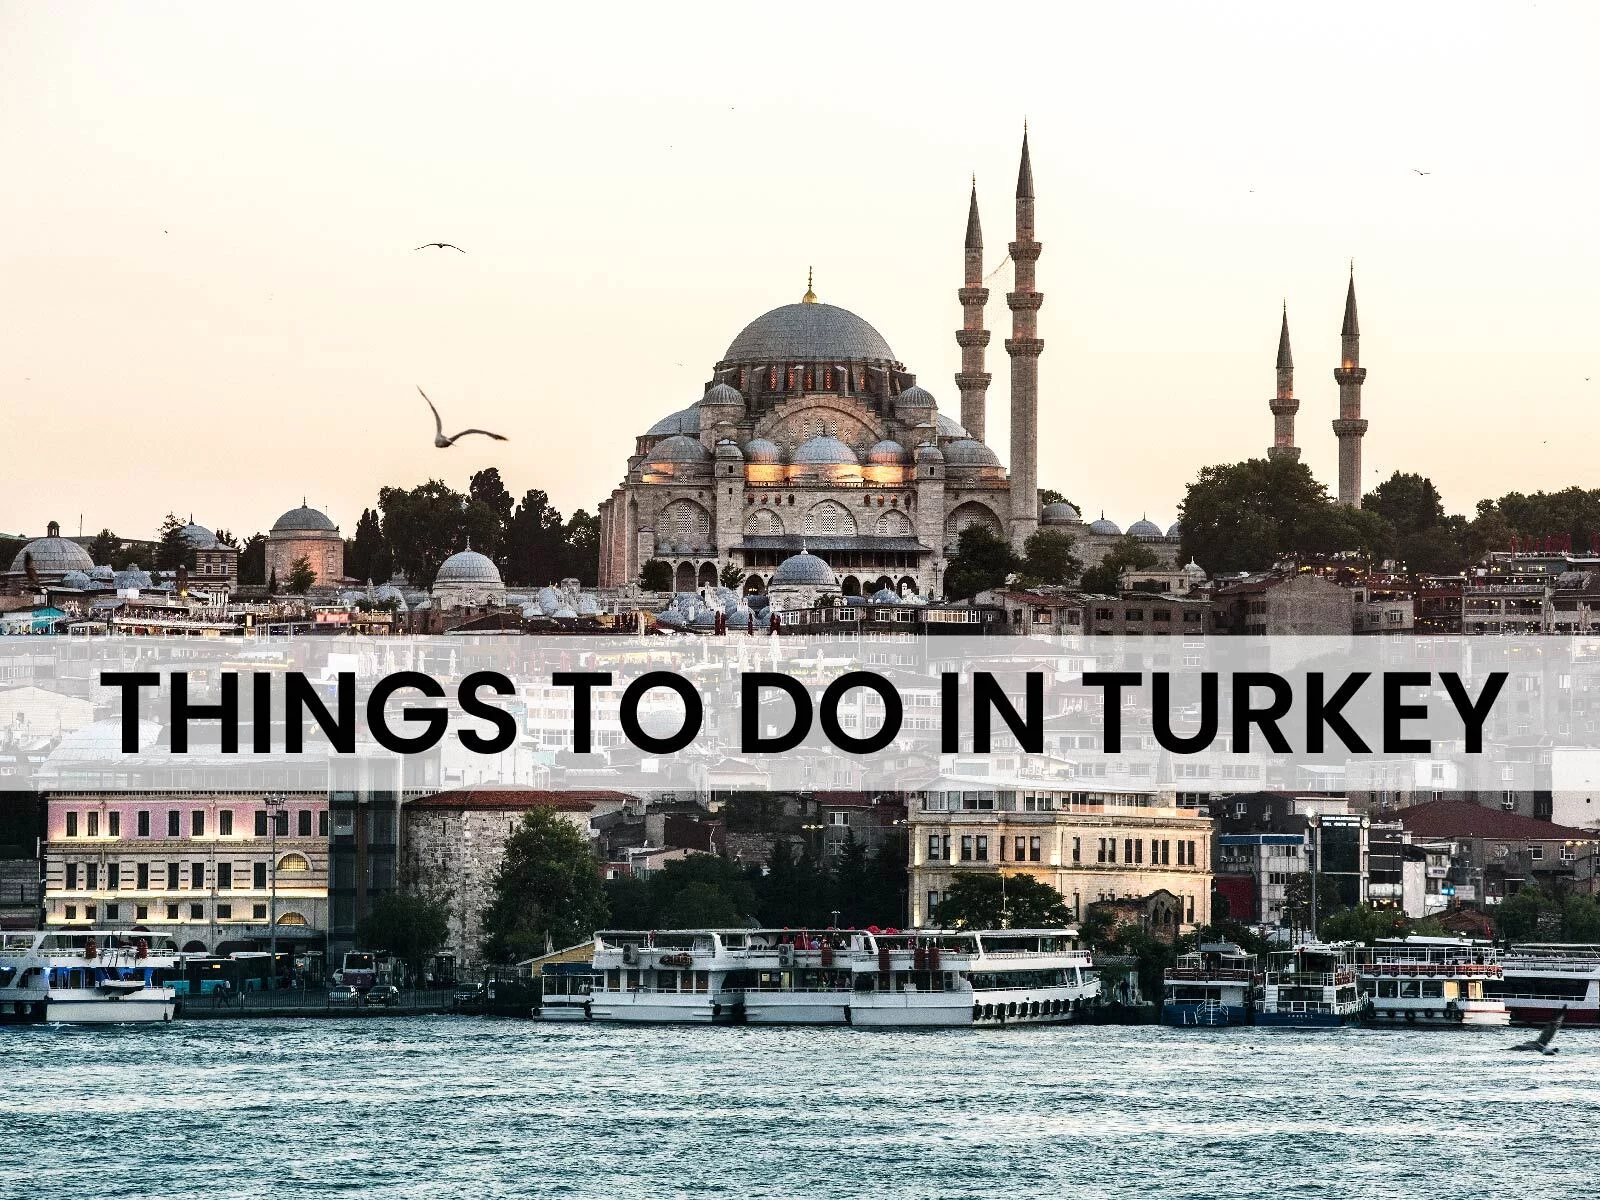 Things to do in Turkey